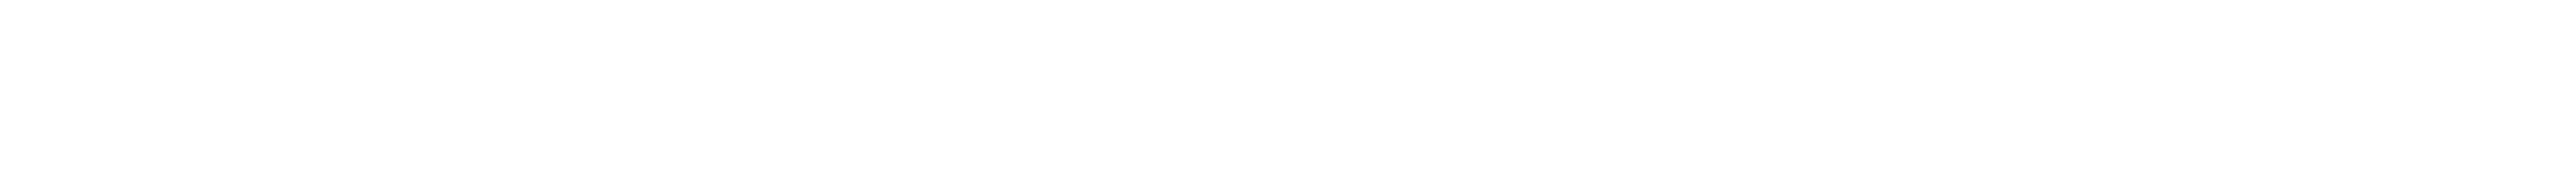 clouds background1